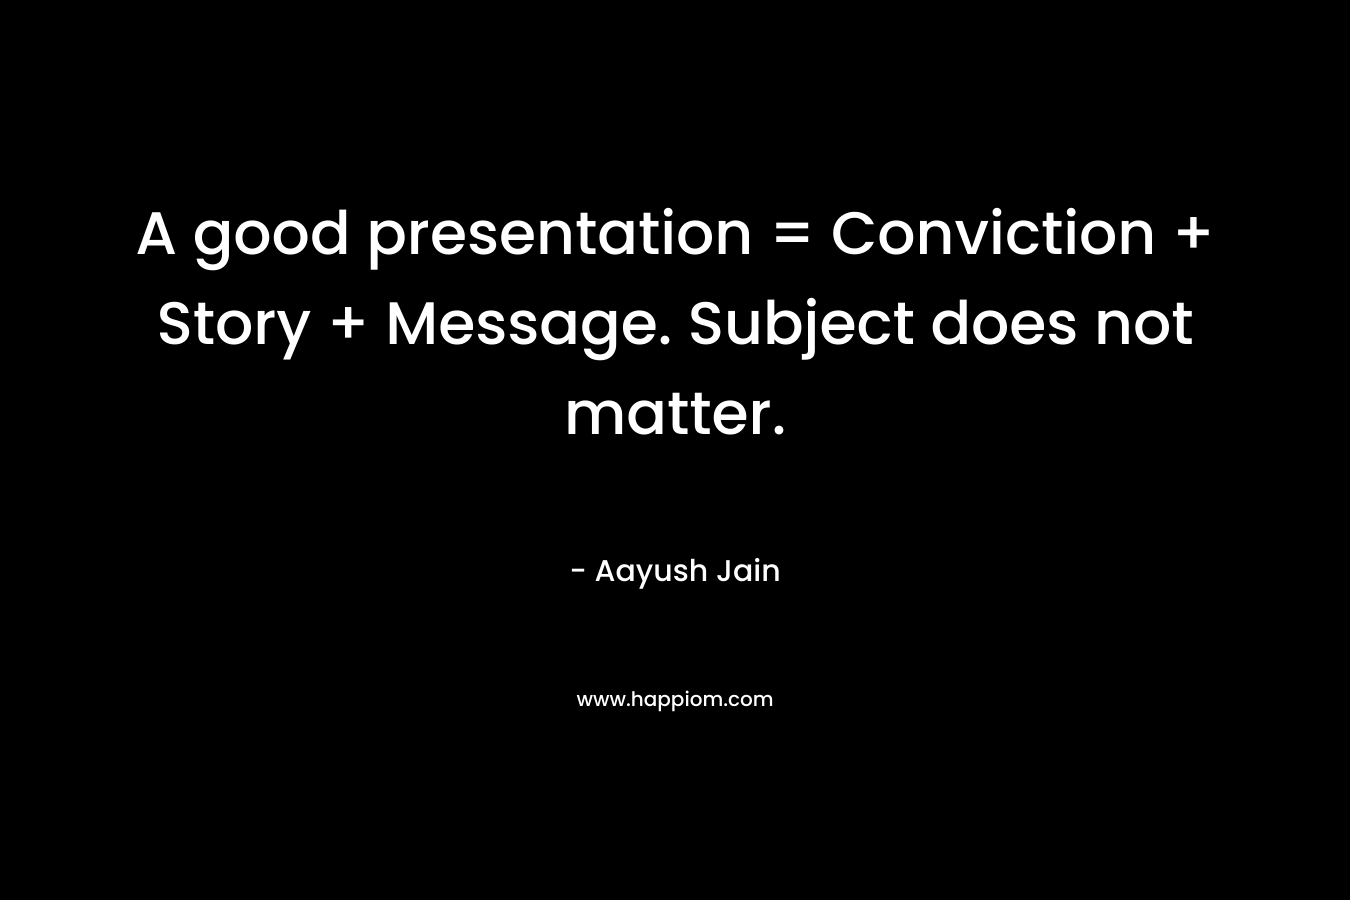 A good presentation = Conviction + Story + Message. Subject does not matter. – Aayush Jain